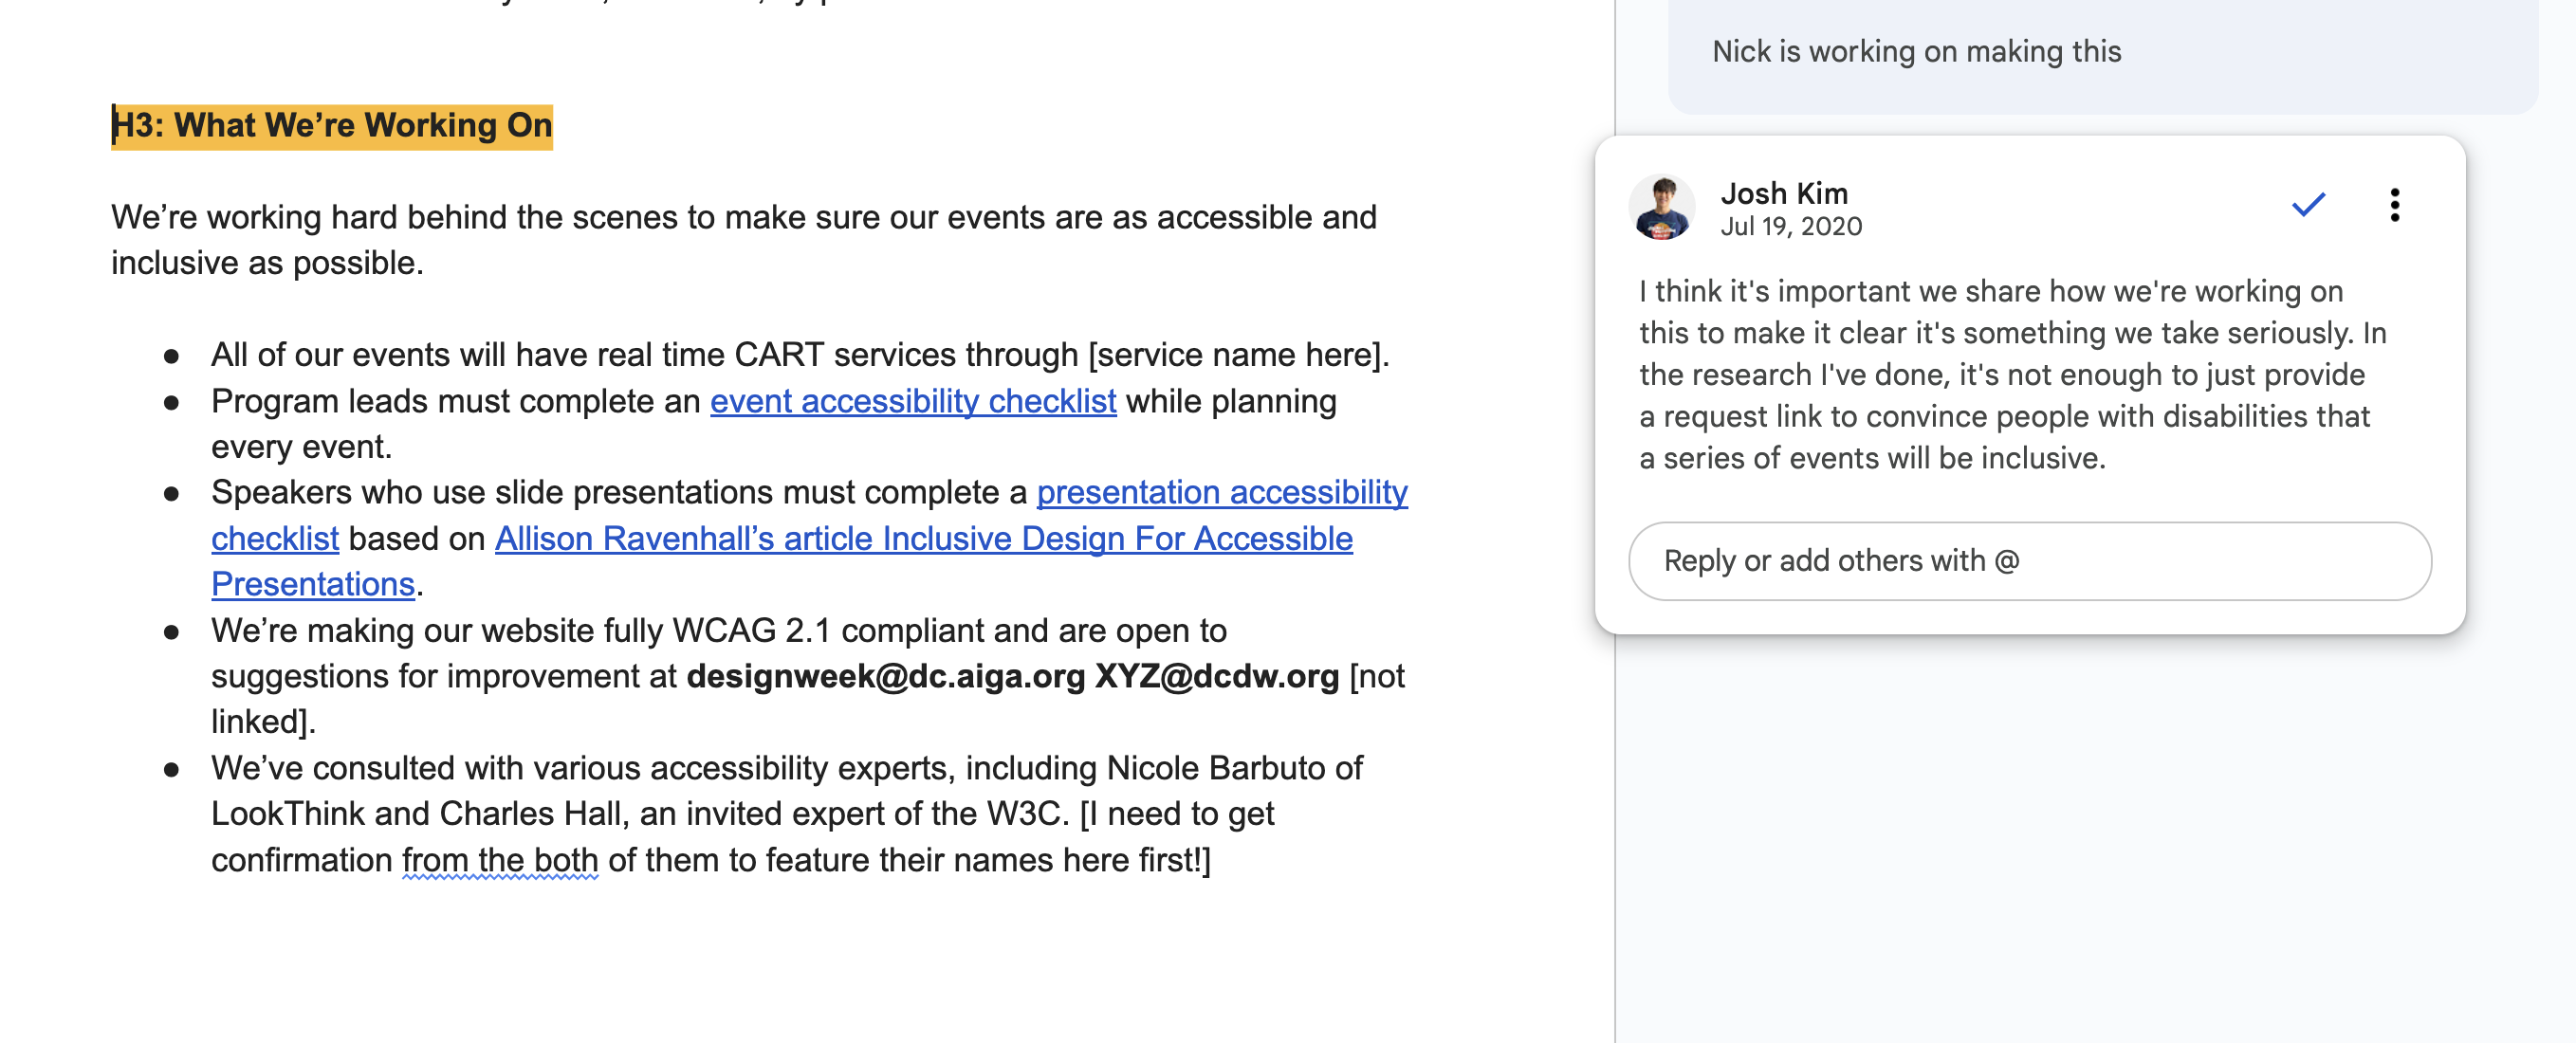 When drafting our accessibility statement, I wrote a comment arguing for transparency.